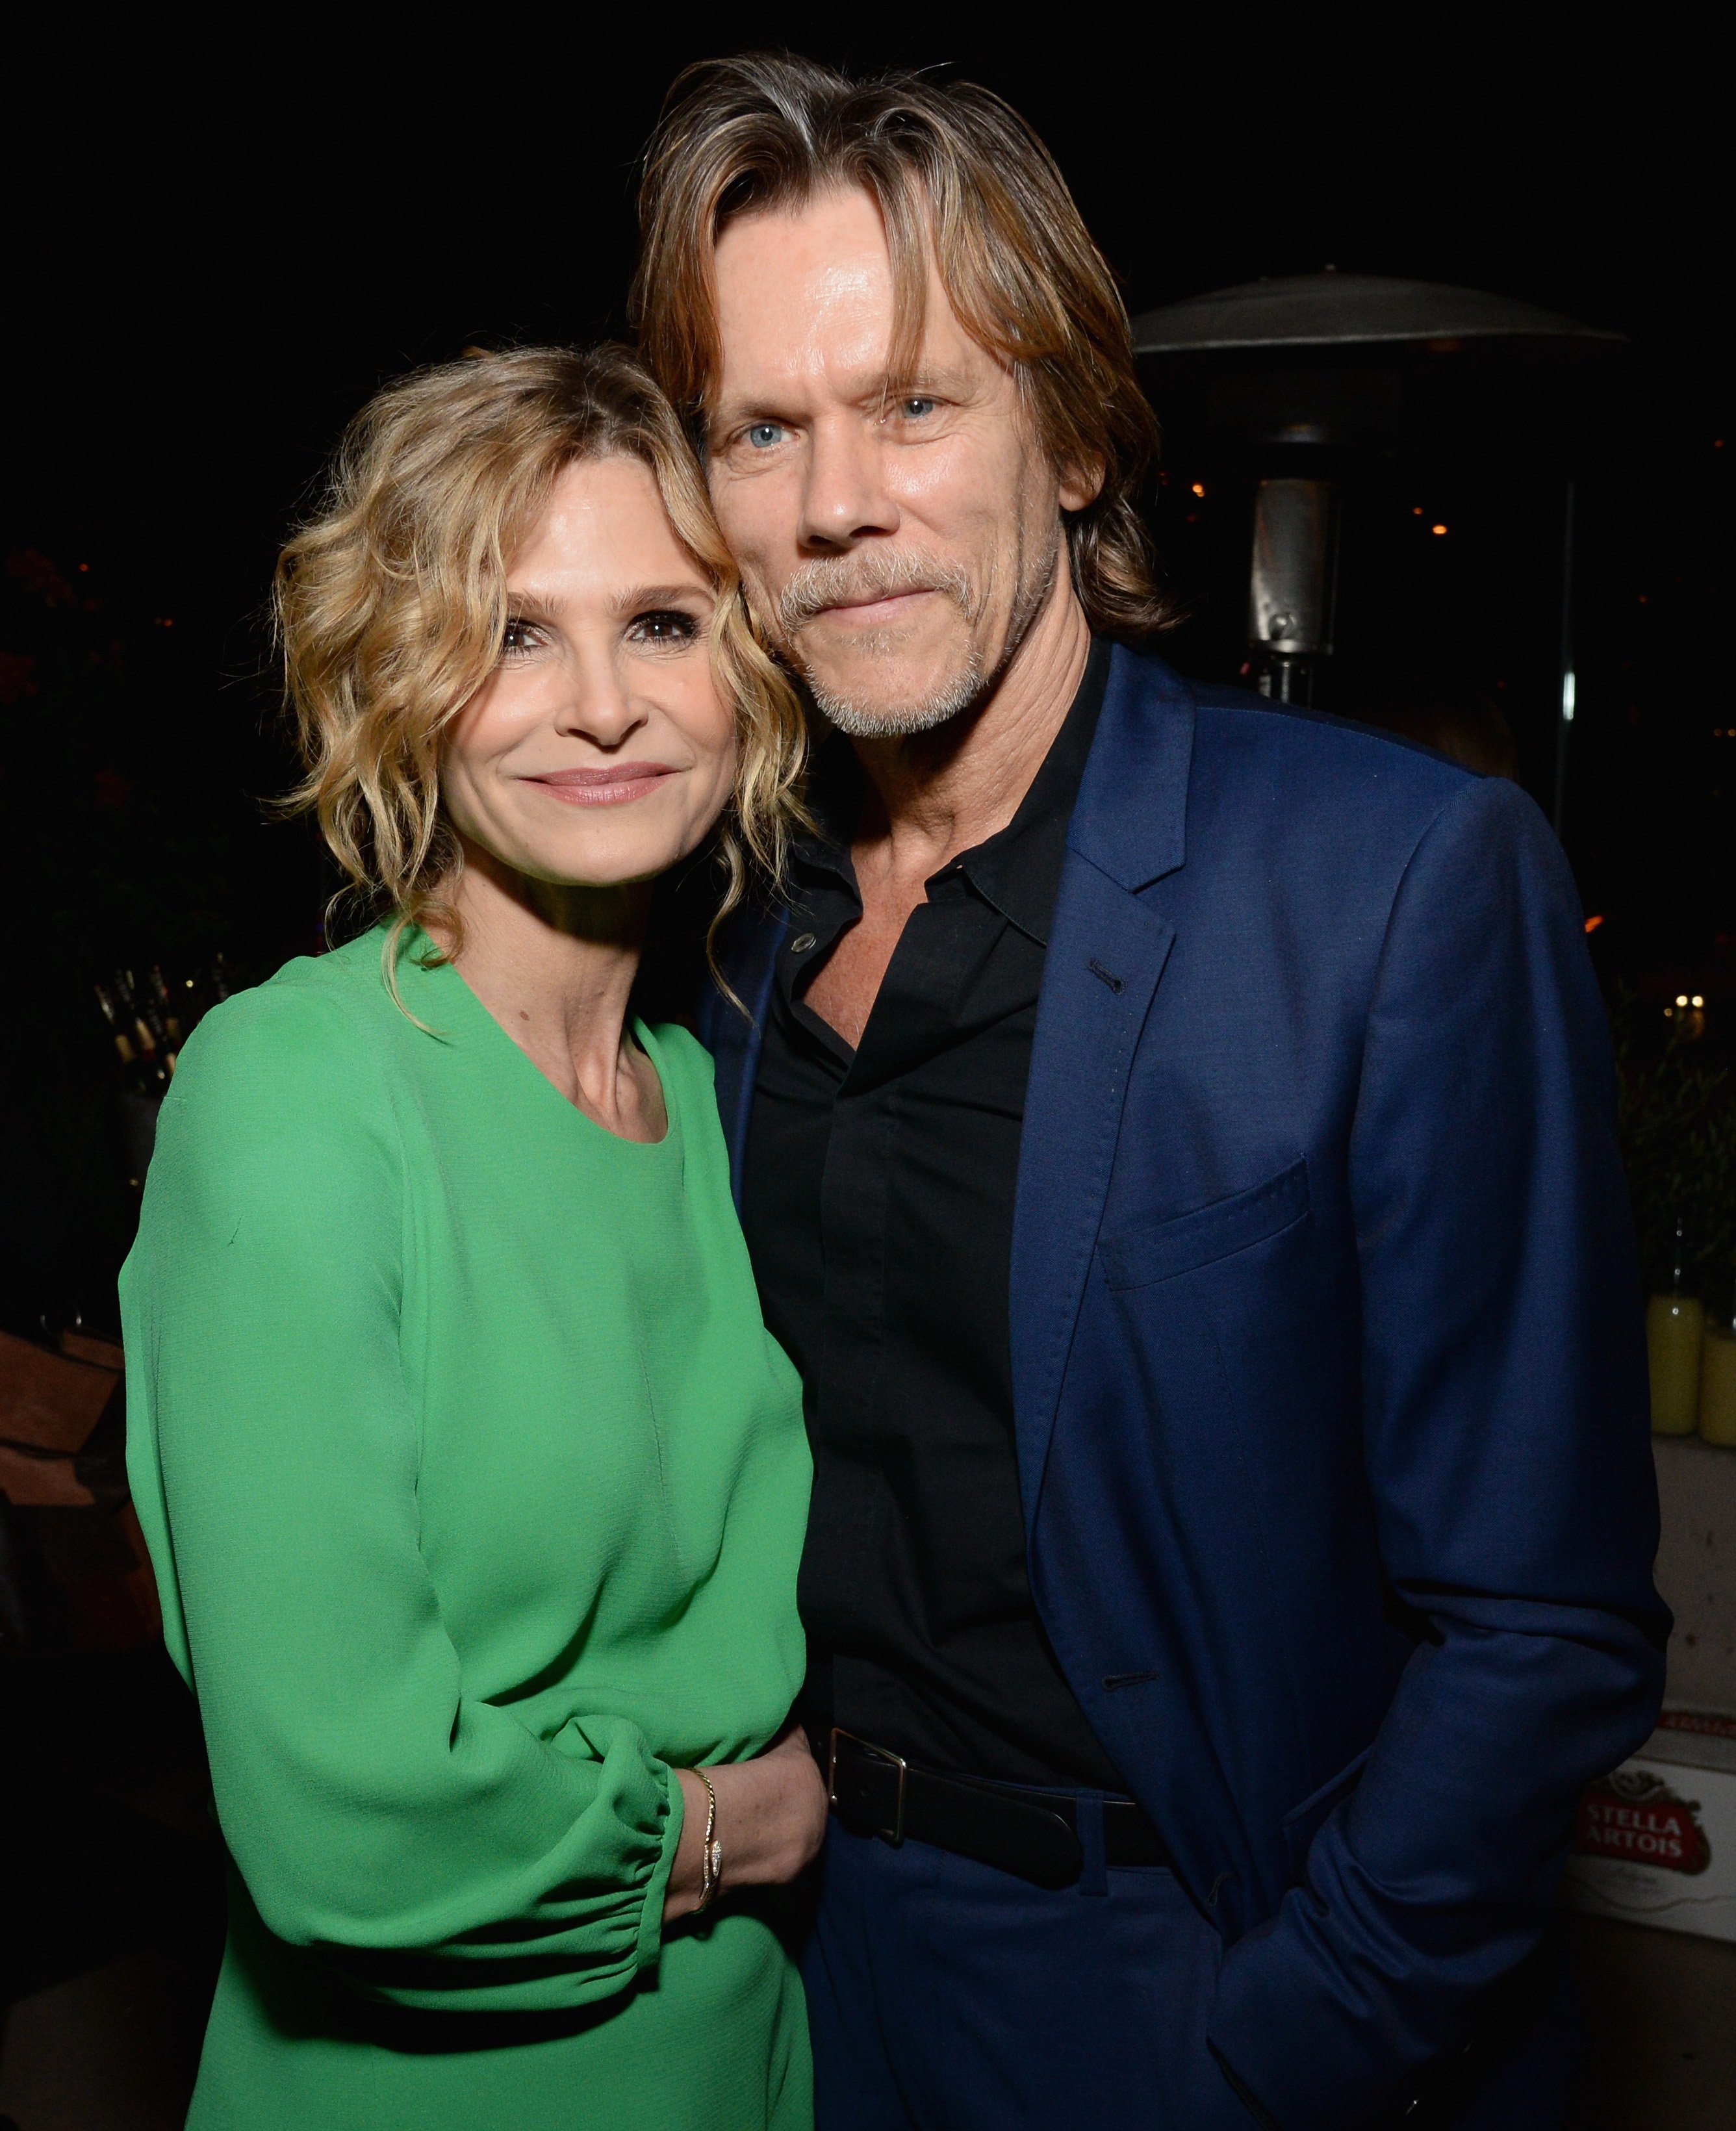 Kyra Sedgwick (L) and Kevin Bacon at Moet Celebrates The 75th Anniversary of The Golden Globes Award Season at Catch LA on November 15, 2017 | Photo: GettyImages